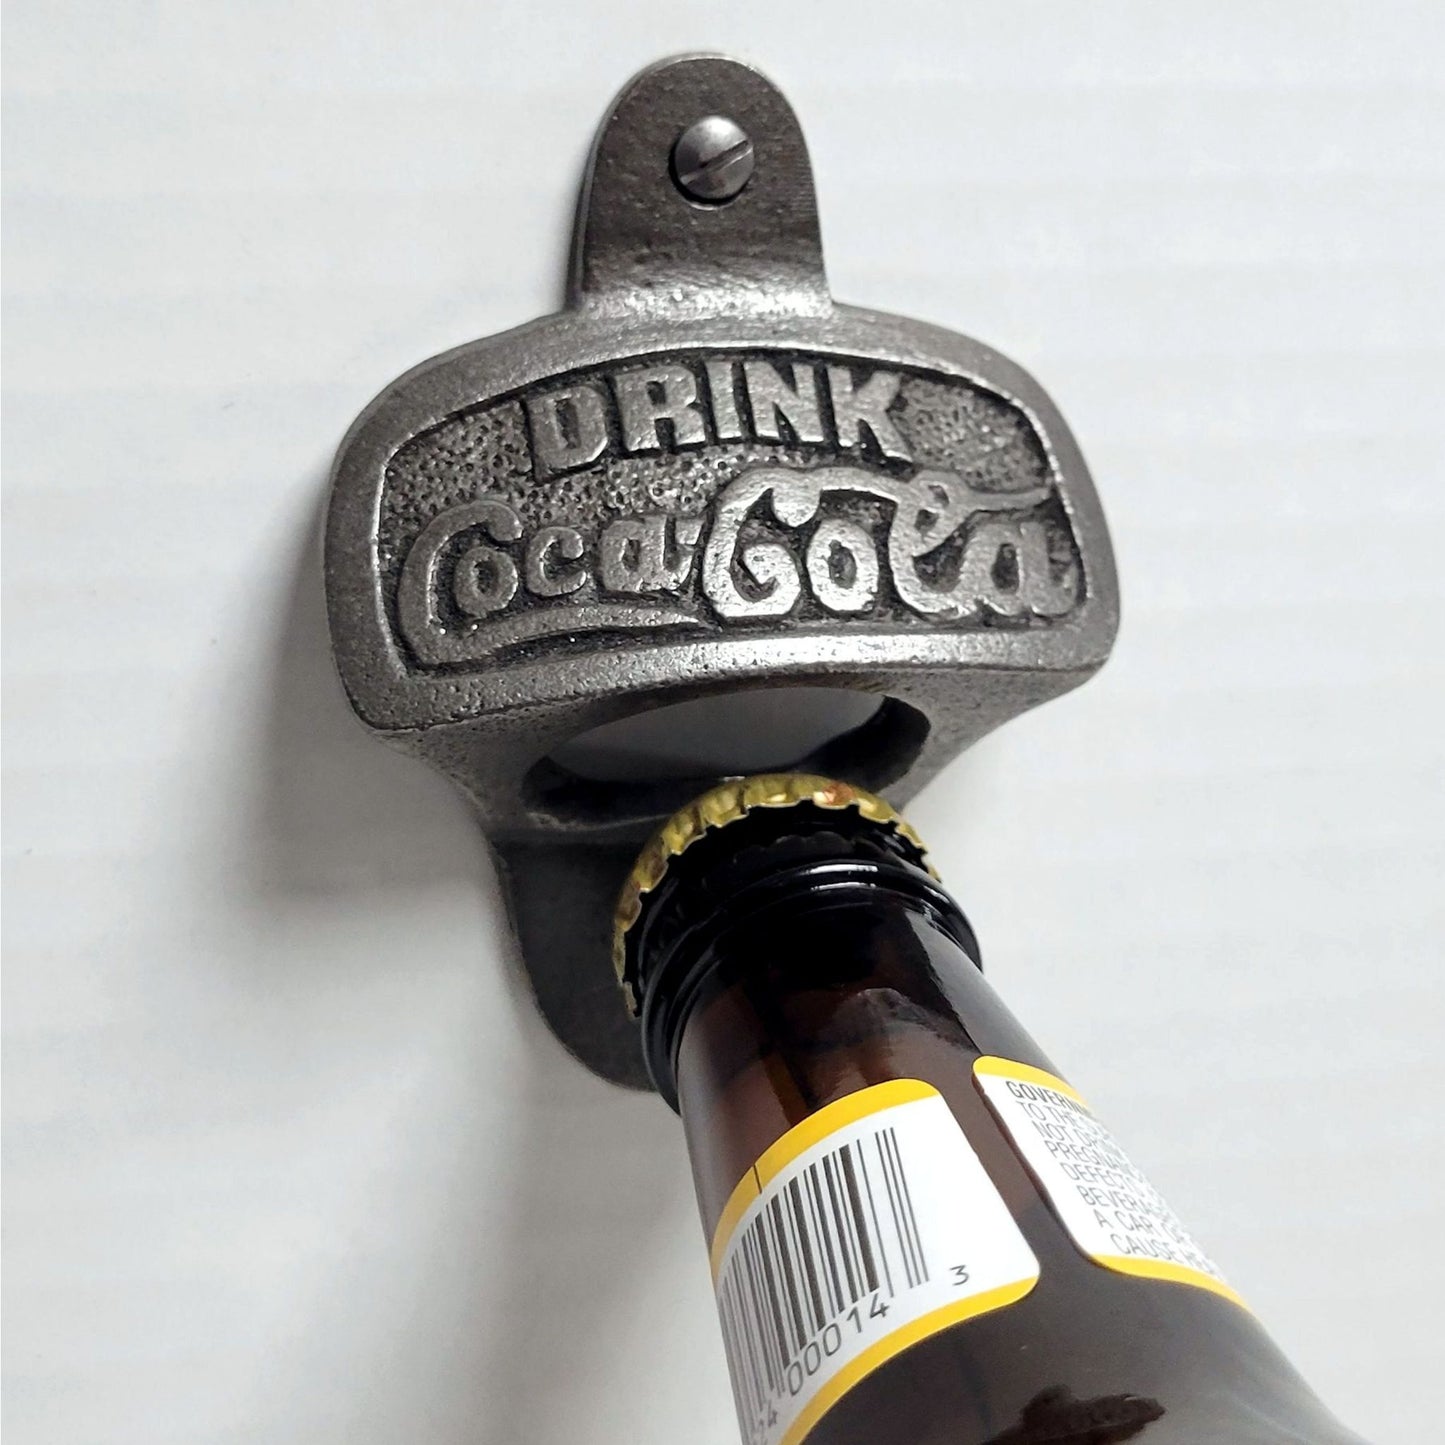 Coca-Cola Cast Iron Series Wall Mounted Man Cave Bottle Opener